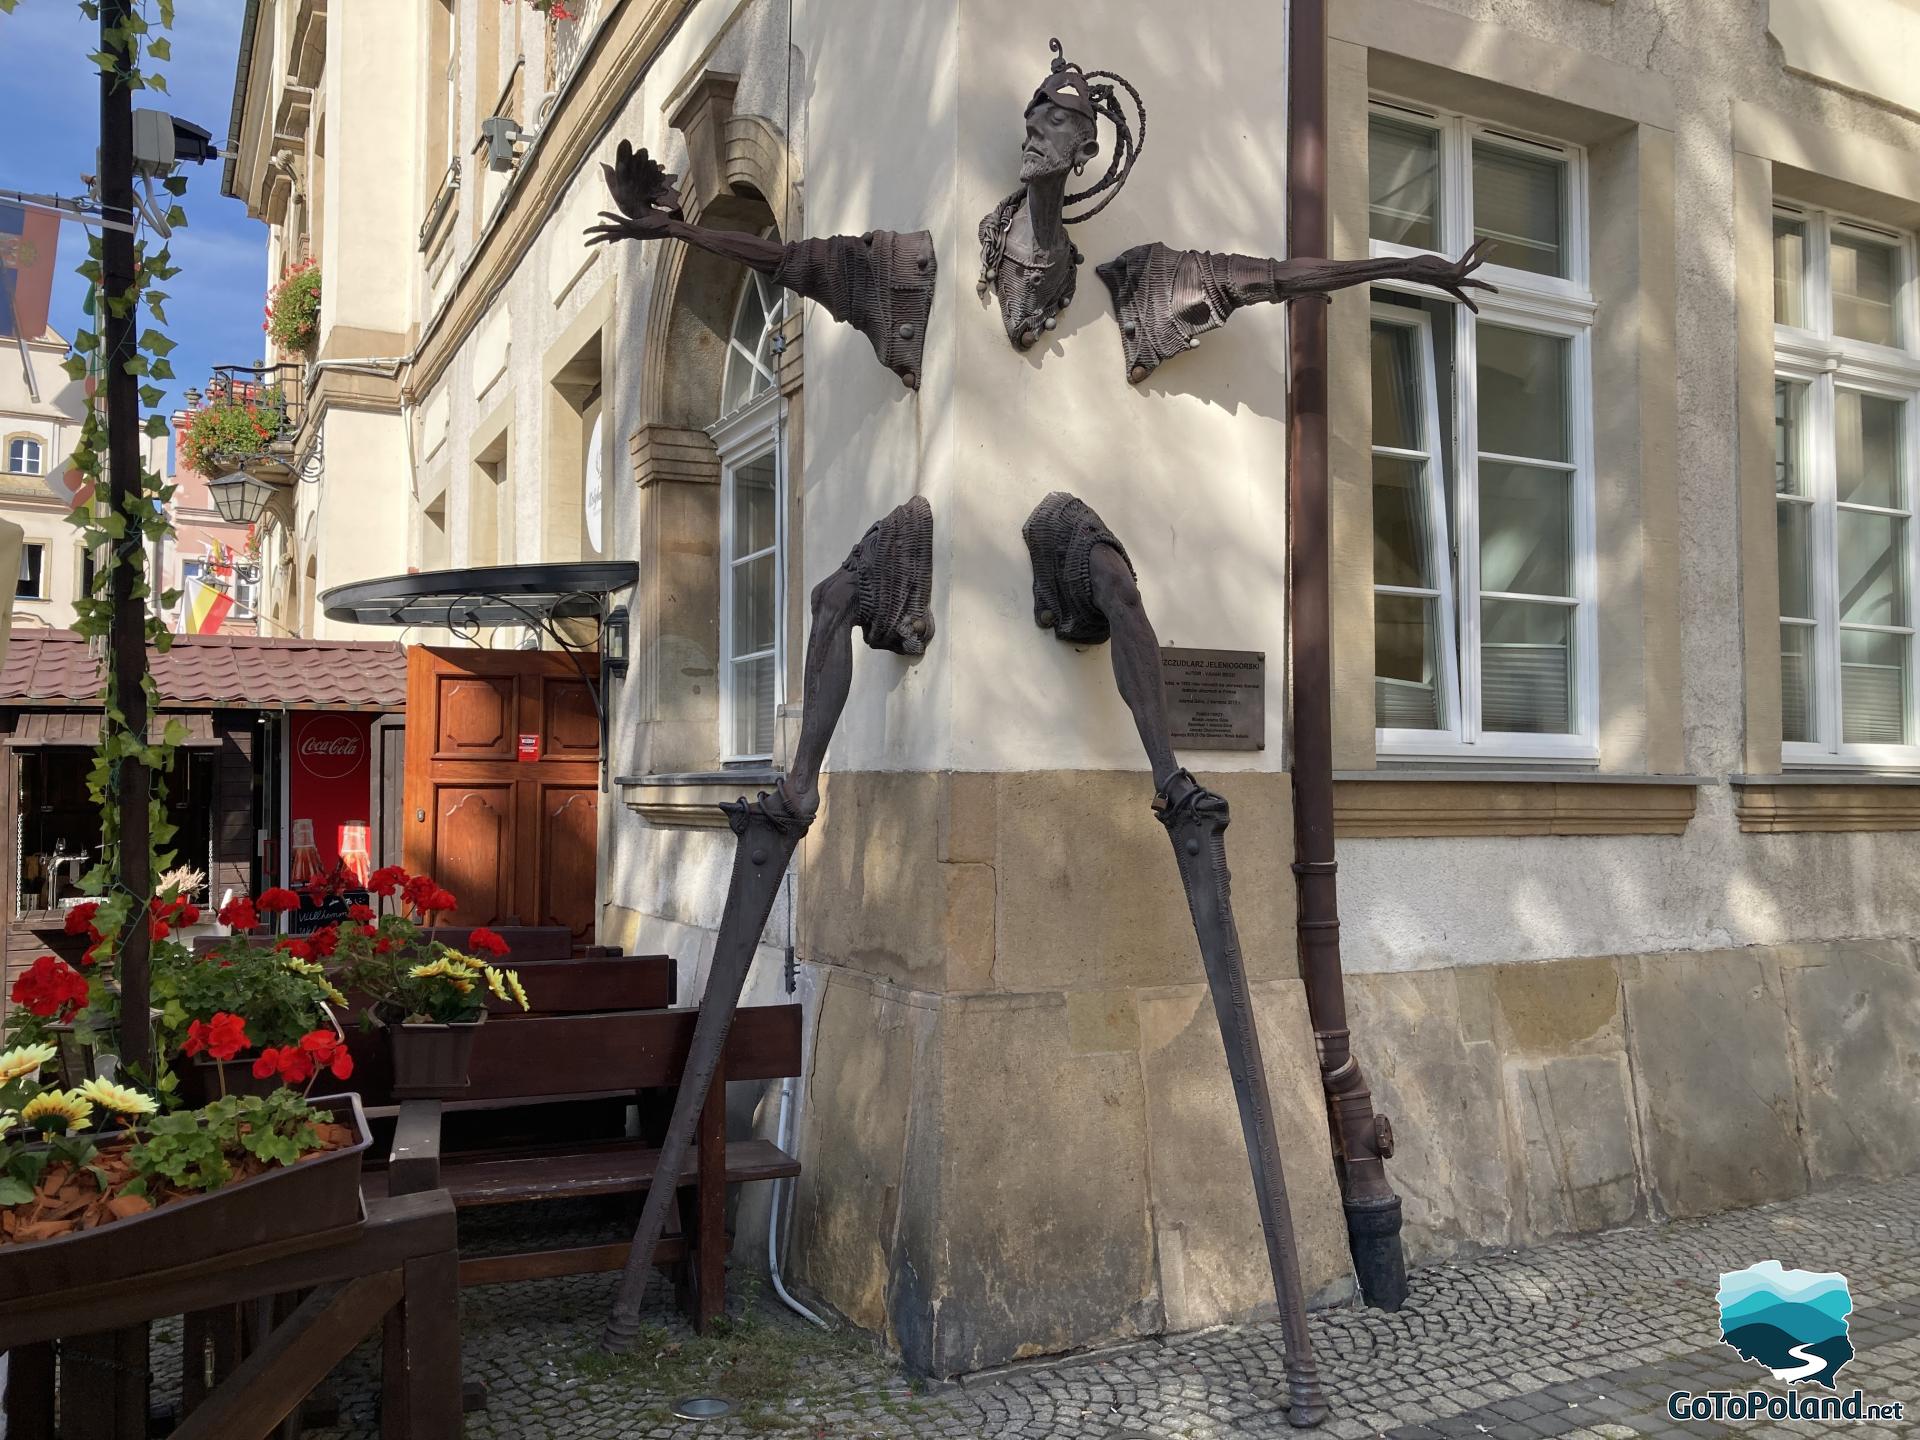 A statue of a stilt walker emerging from the corner of the building